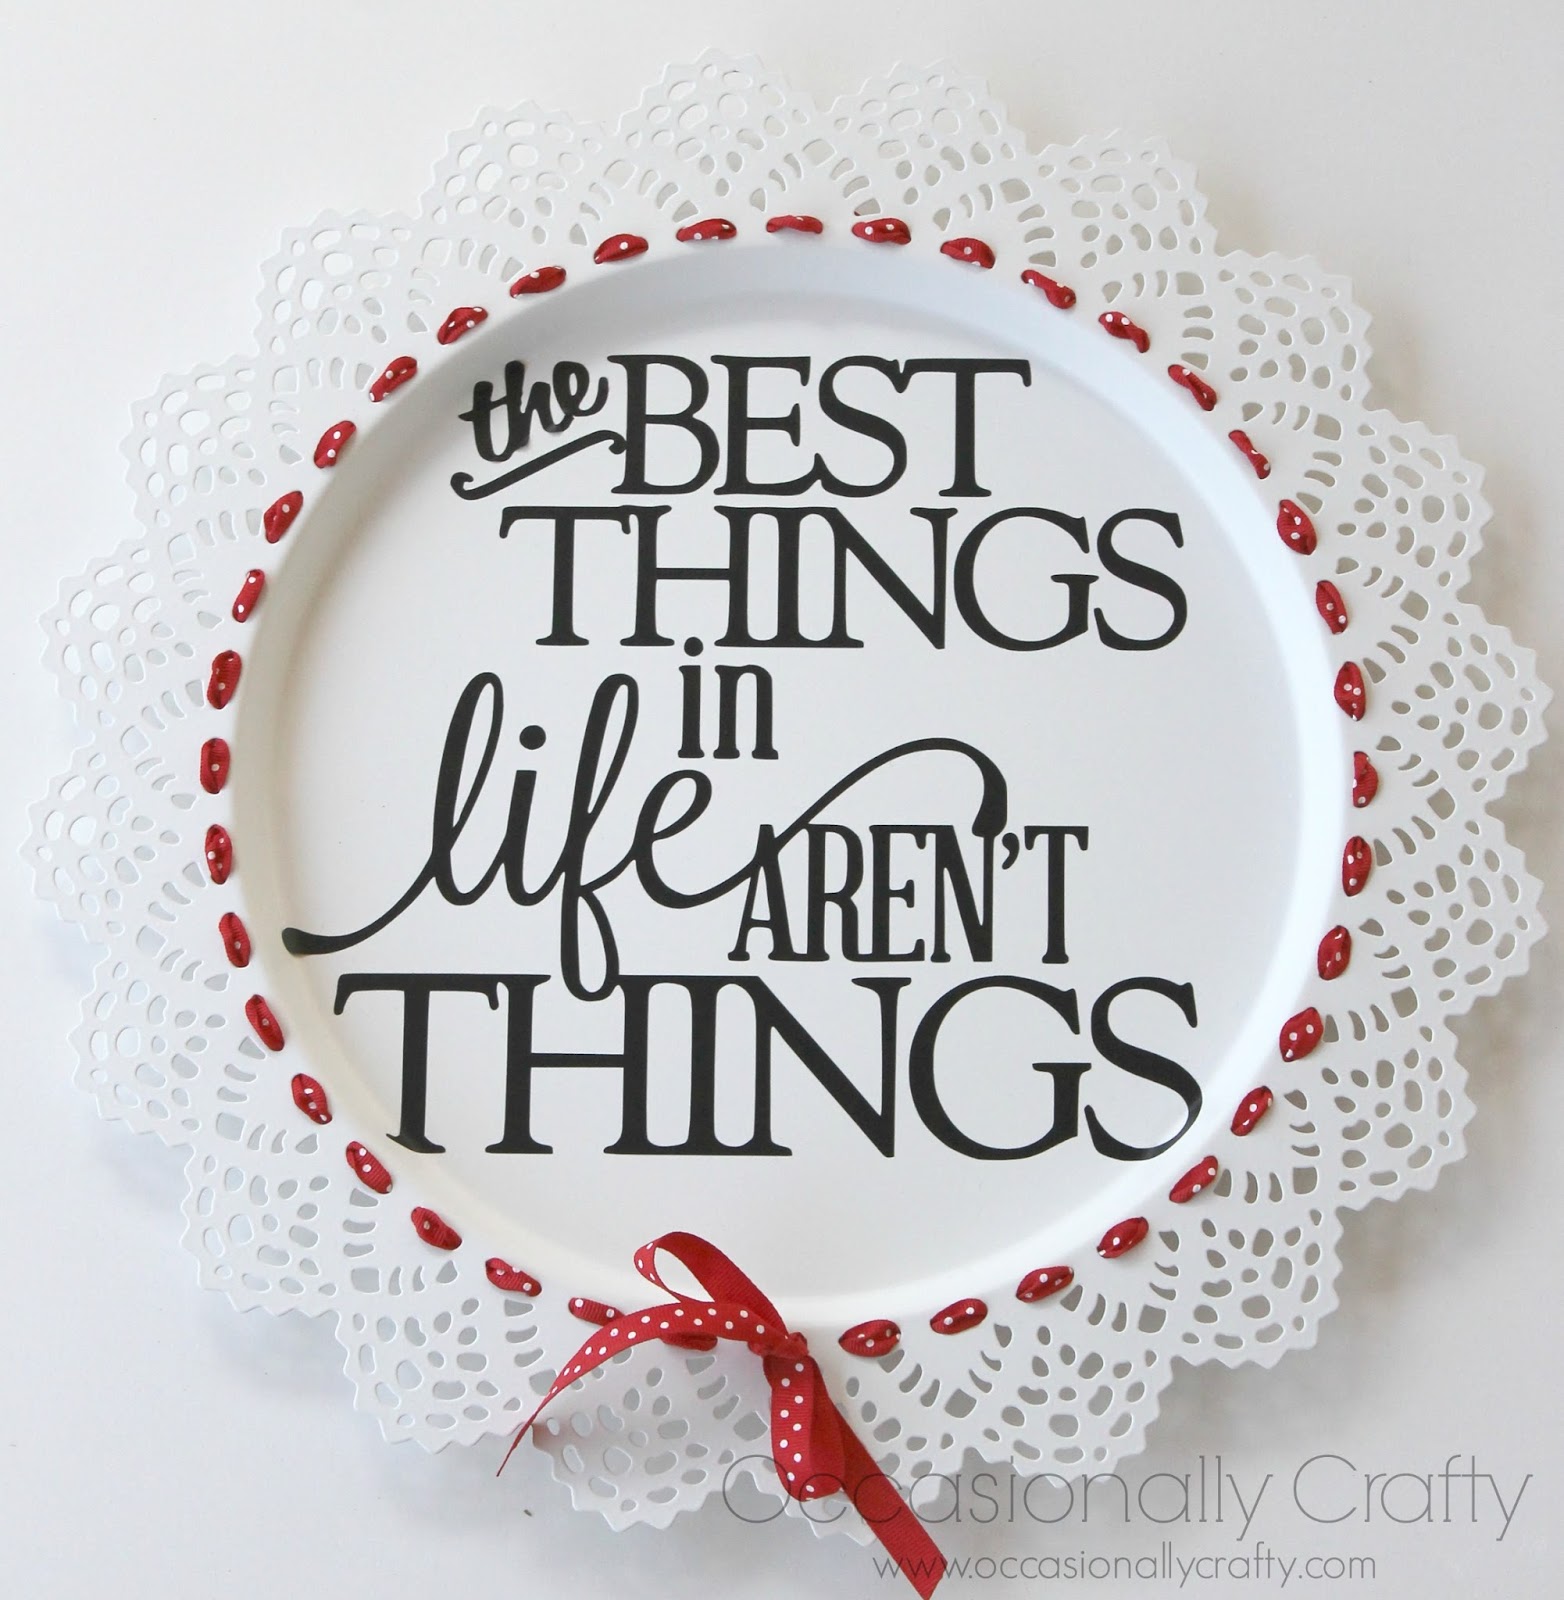 Vinyl Charger from IKEA "The Best Things in life Aren t Things"